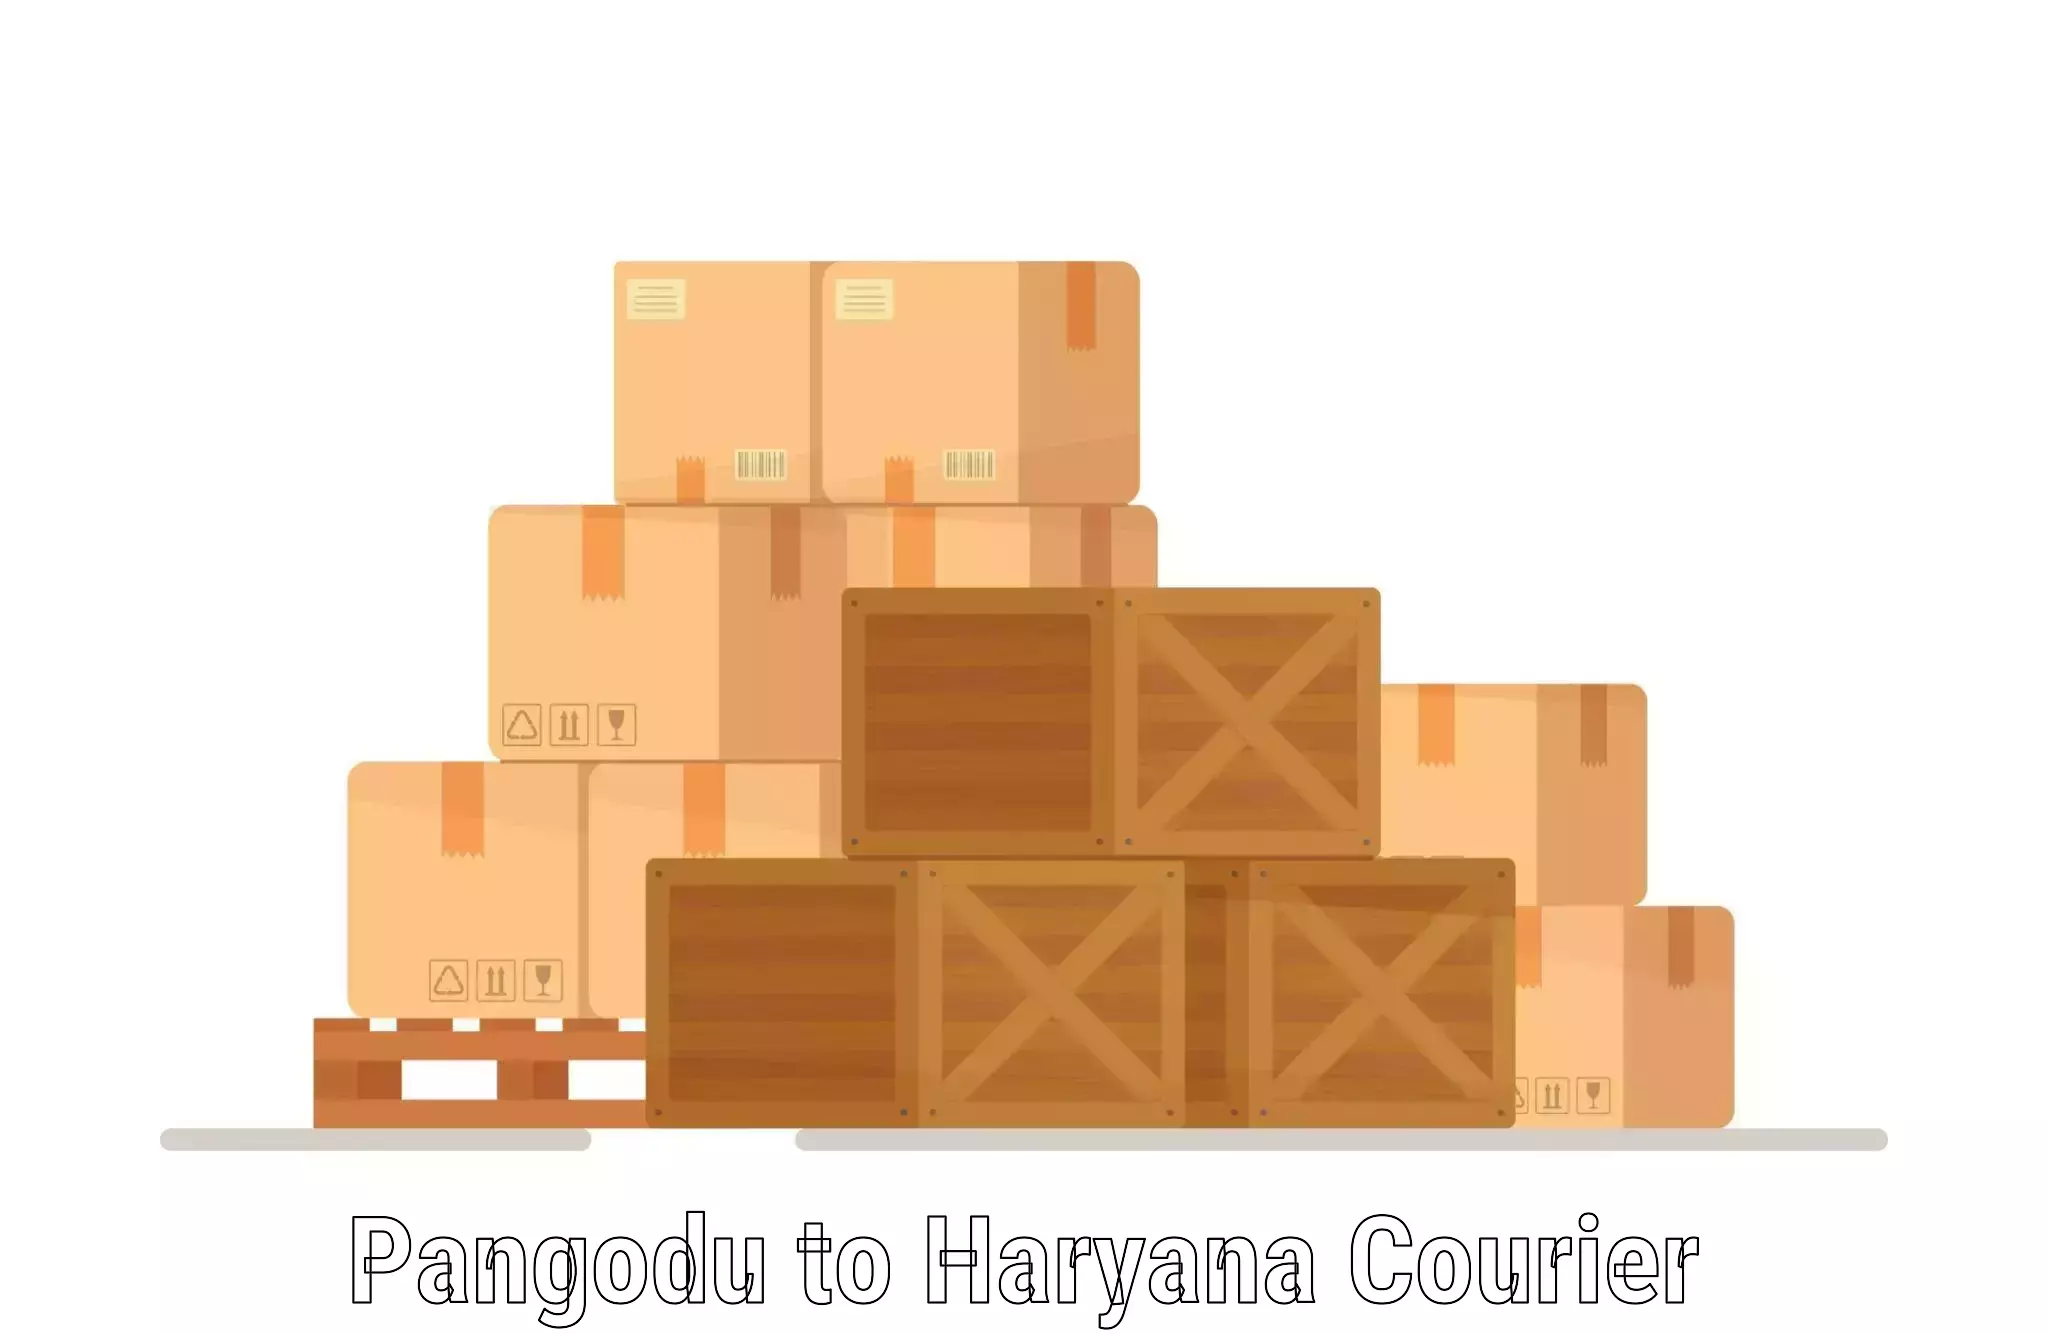 Global courier networks Pangodu to Panipat